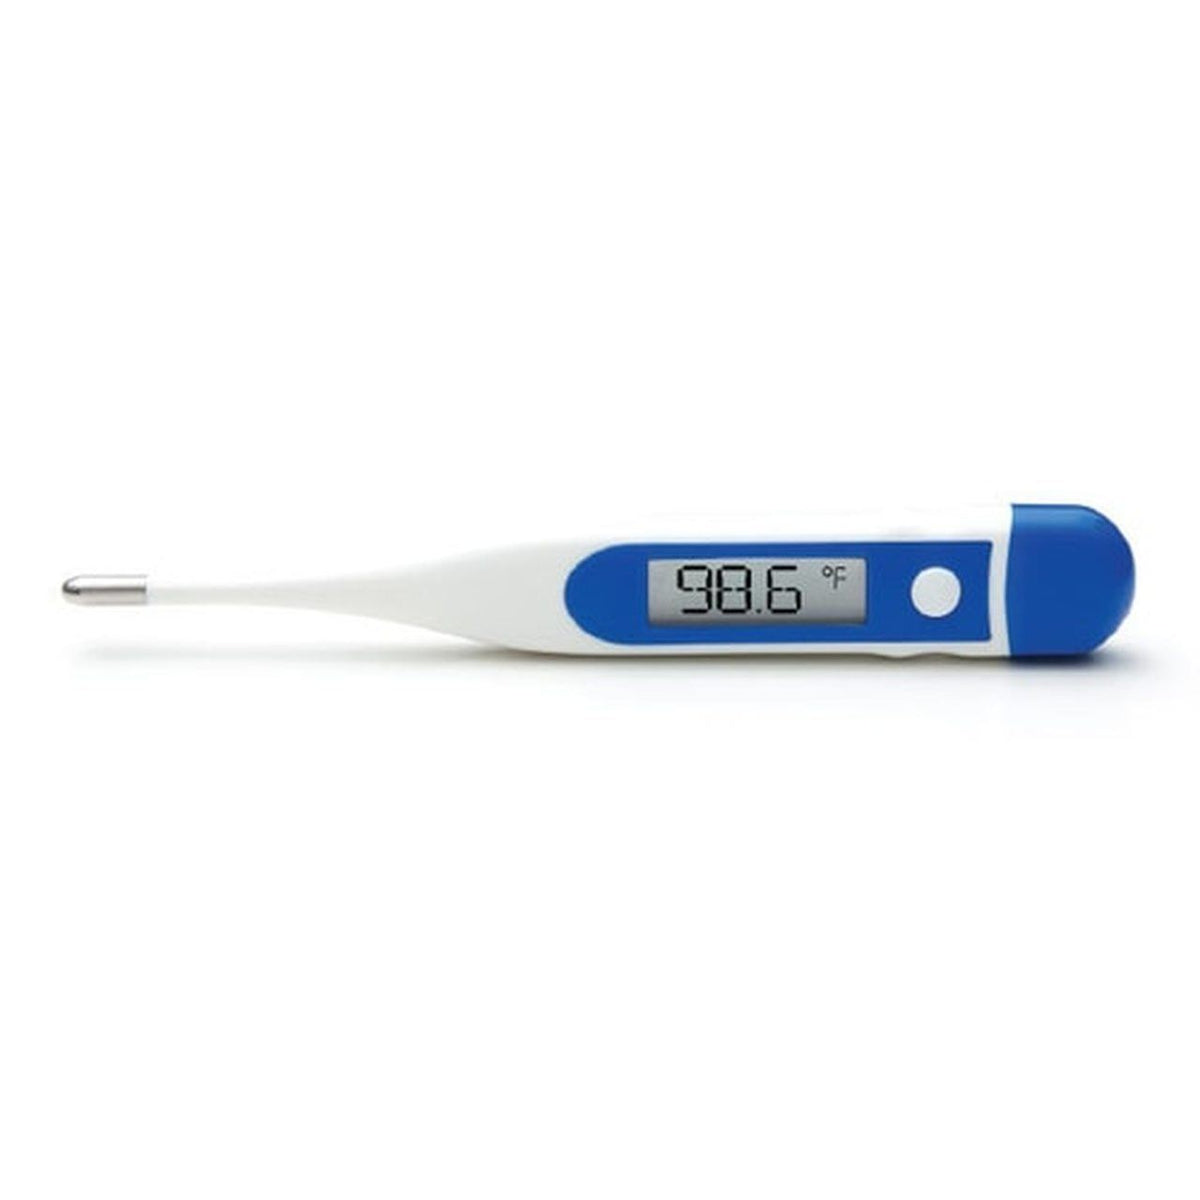 Lightweight Digital Thermometer - The First Aid Gear Shop